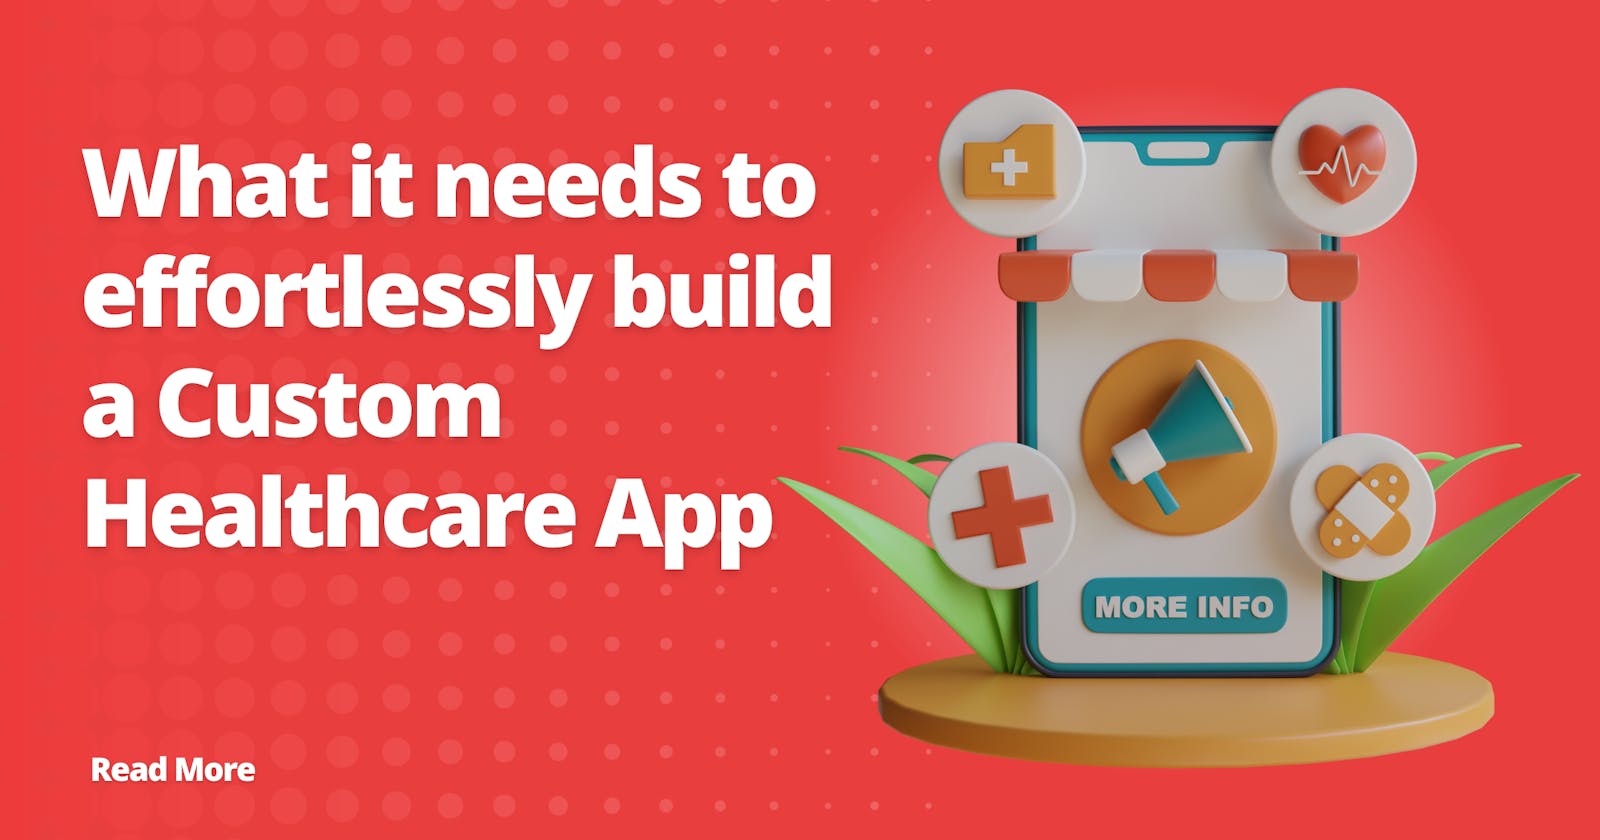 What it needs to effortlessly build a custom healthcare app